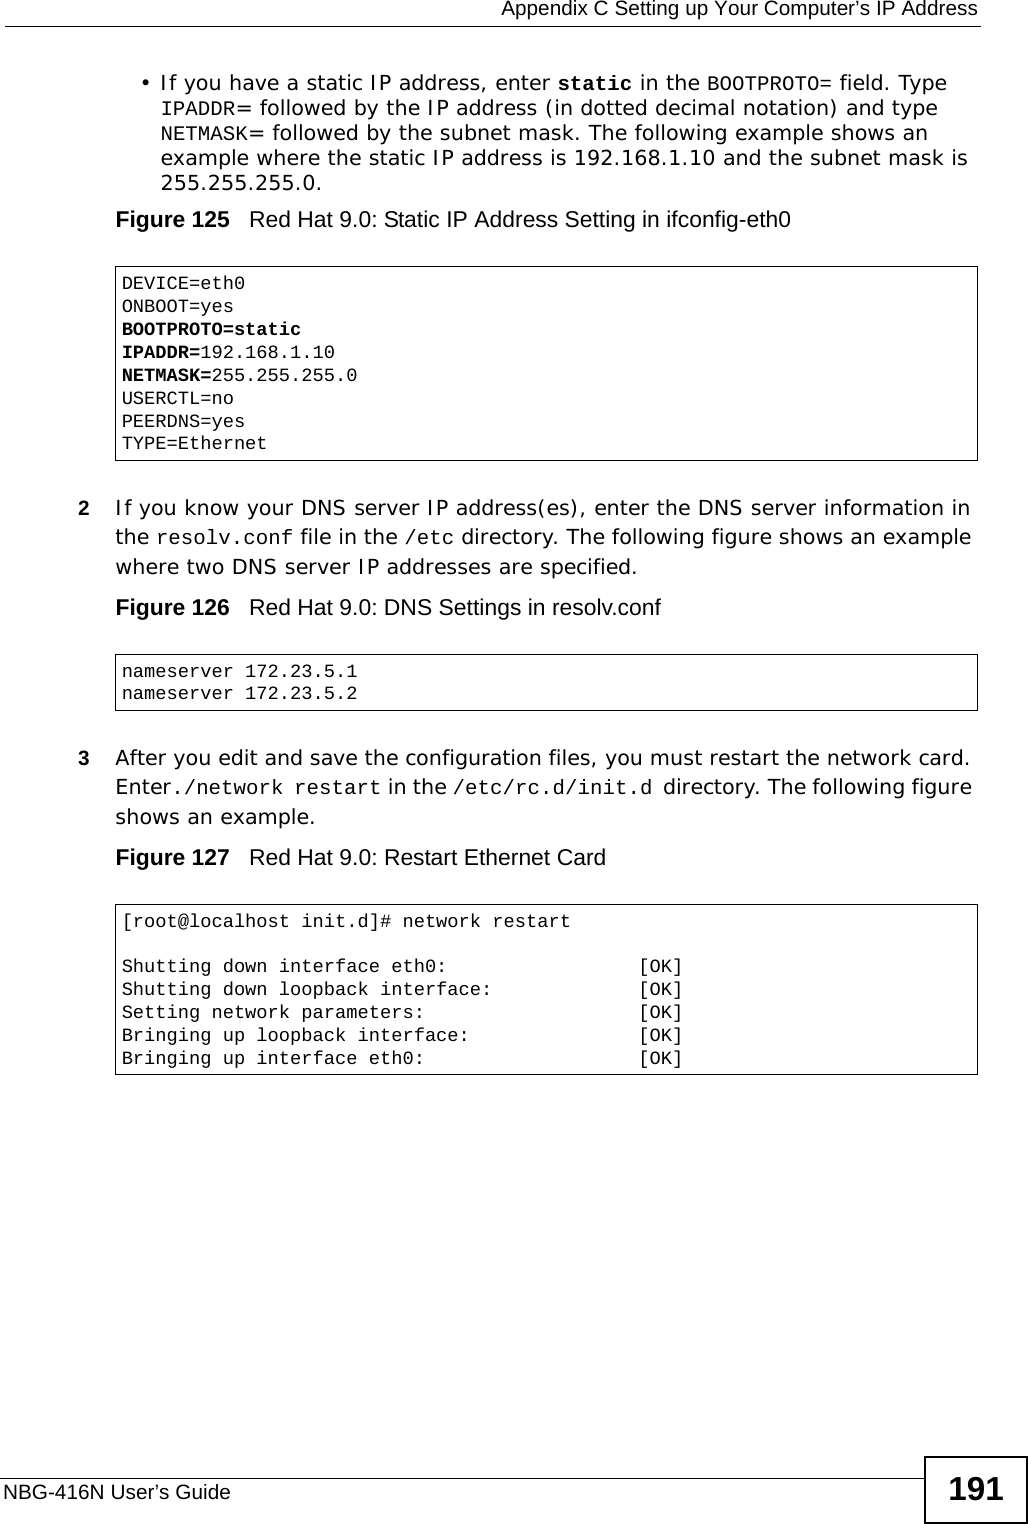  Appendix C Setting up Your Computer’s IP AddressNBG-416N User’s Guide 191• If you have a static IP address, enter static in the BOOTPROTO= field. Type IPADDR= followed by the IP address (in dotted decimal notation) and type NETMASK= followed by the subnet mask. The following example shows an example where the static IP address is 192.168.1.10 and the subnet mask is 255.255.255.0. Figure 125   Red Hat 9.0: Static IP Address Setting in ifconfig-eth0   2If you know your DNS server IP address(es), enter the DNS server information in the resolv.conf file in the /etc directory. The following figure shows an example where two DNS server IP addresses are specified.Figure 126   Red Hat 9.0: DNS Settings in resolv.conf   3After you edit and save the configuration files, you must restart the network card. Enter./network restart in the /etc/rc.d/init.d directory. The following figure shows an example.Figure 127   Red Hat 9.0: Restart Ethernet Card DEVICE=eth0ONBOOT=yesBOOTPROTO=staticIPADDR=192.168.1.10NETMASK=255.255.255.0USERCTL=noPEERDNS=yesTYPE=Ethernetnameserver 172.23.5.1nameserver 172.23.5.2[root@localhost init.d]# network restartShutting down interface eth0:                 [OK]Shutting down loopback interface:             [OK]Setting network parameters:                   [OK]Bringing up loopback interface:               [OK]Bringing up interface eth0:                   [OK]